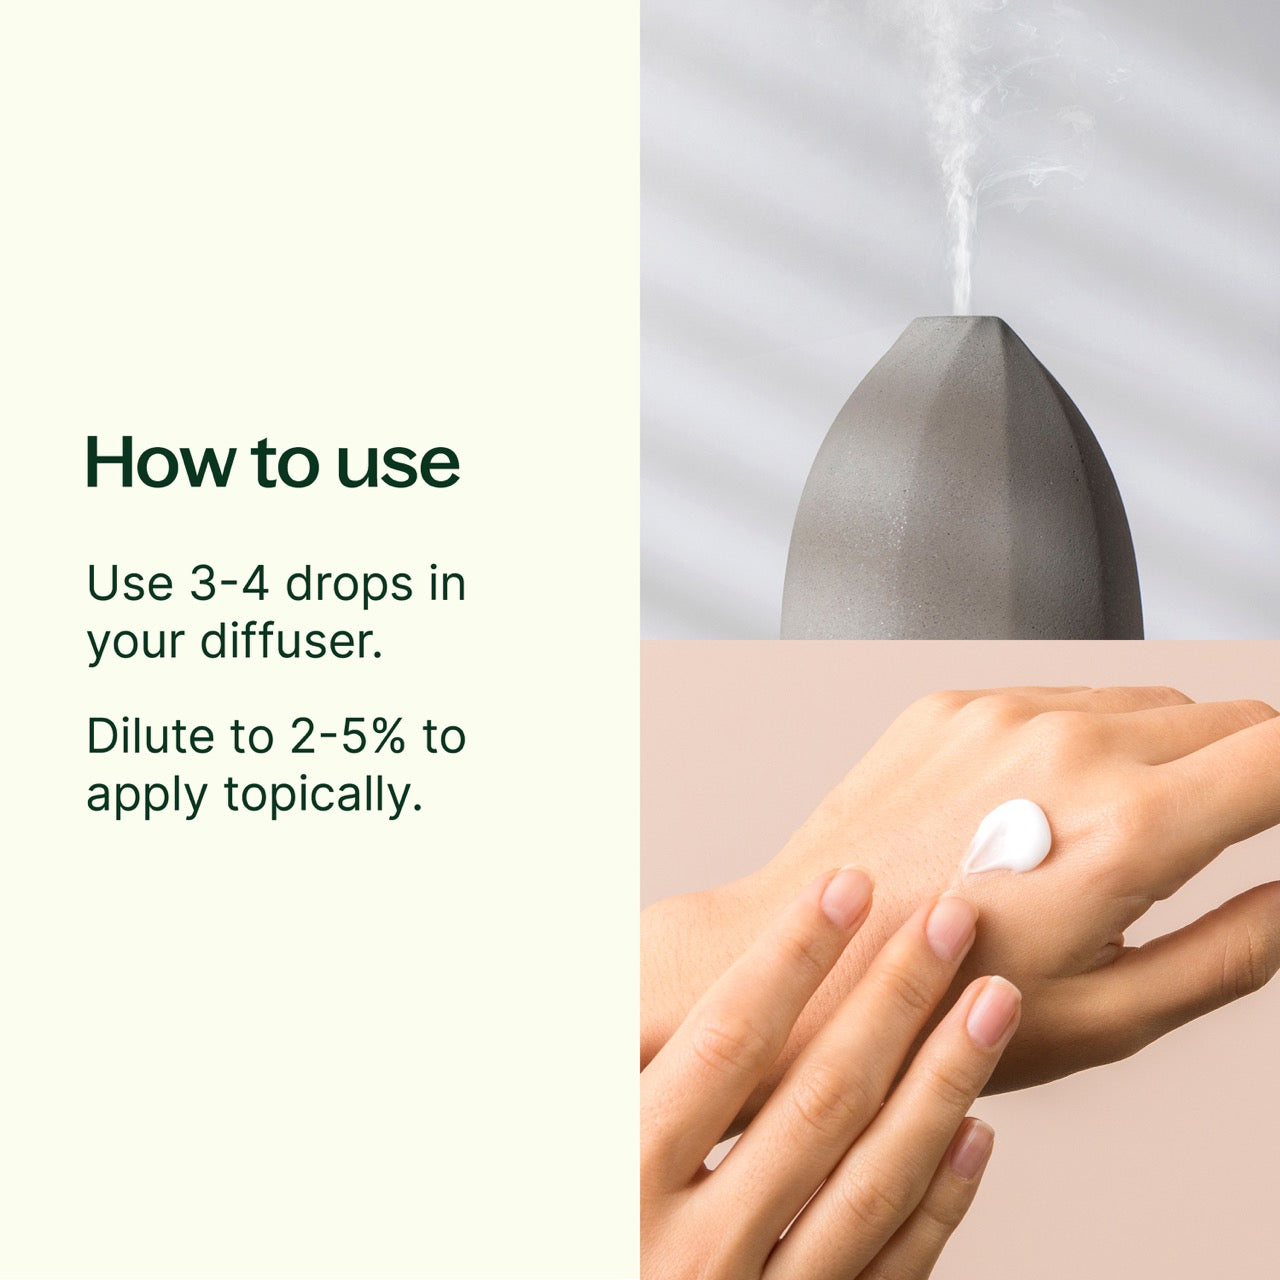 How to Use Tea Tree Essential Oil: Use 3-4 drops in your diffuser or dilute to 2-5% to apply topically